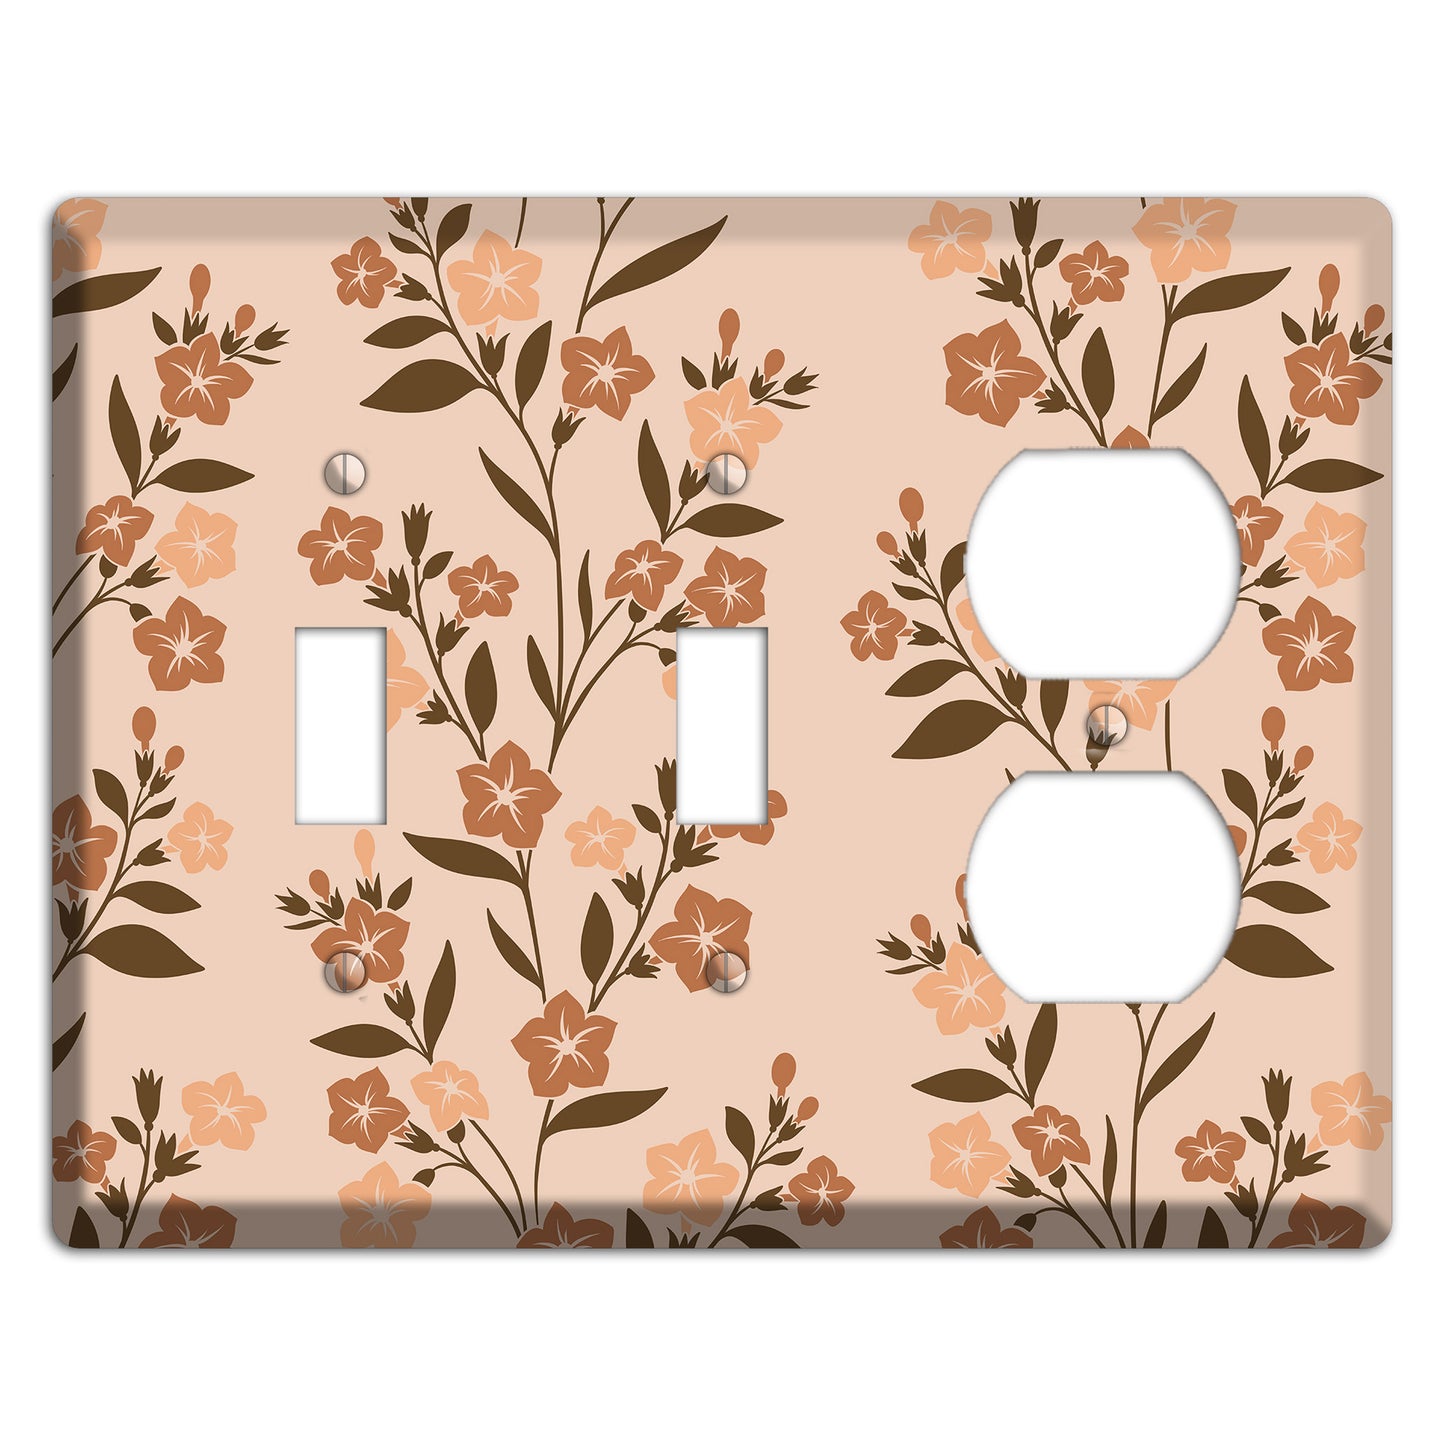 Spring Floral 2 2 Toggle / Duplex Wallplate